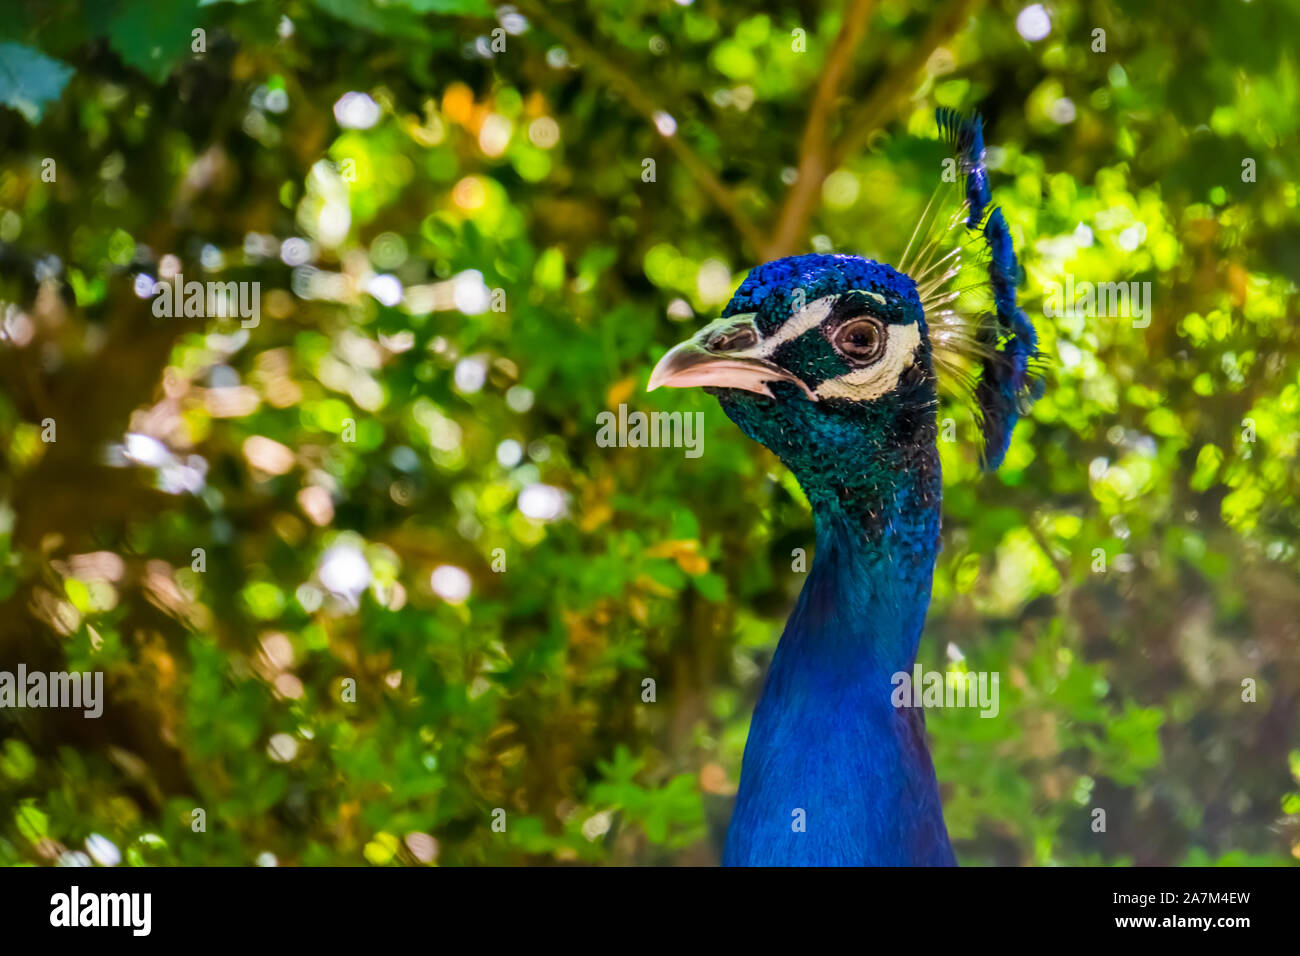 the face of a blue peafowl in closeup, Colorful Indian peacock, popular decorative bird specie Stock Photo